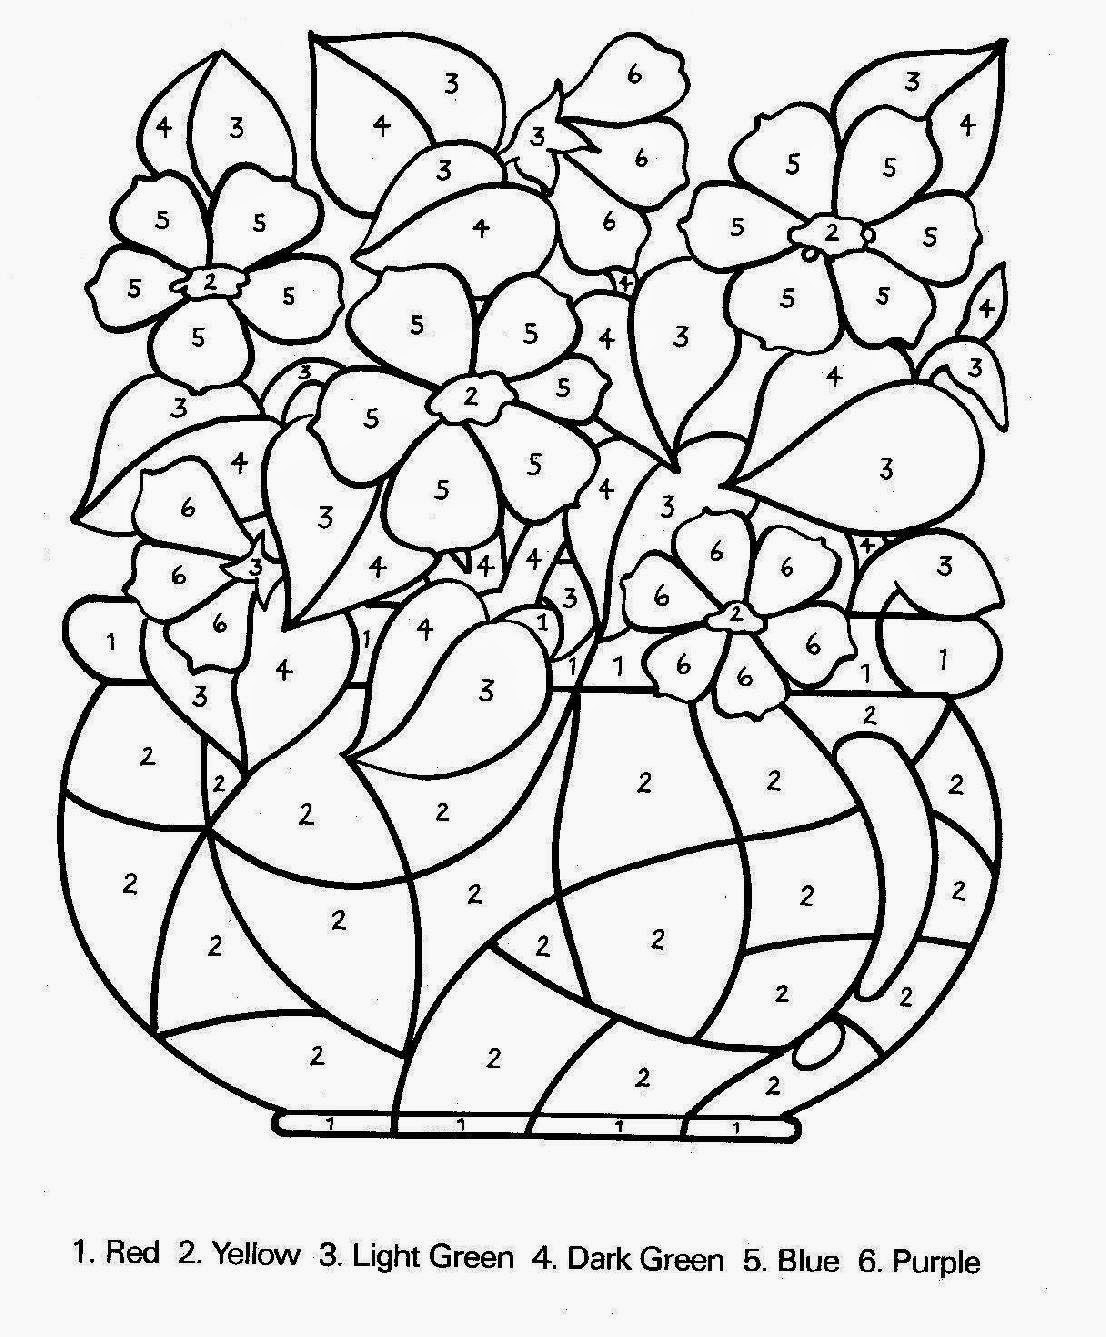 Flower Color by Number Coloring Pages